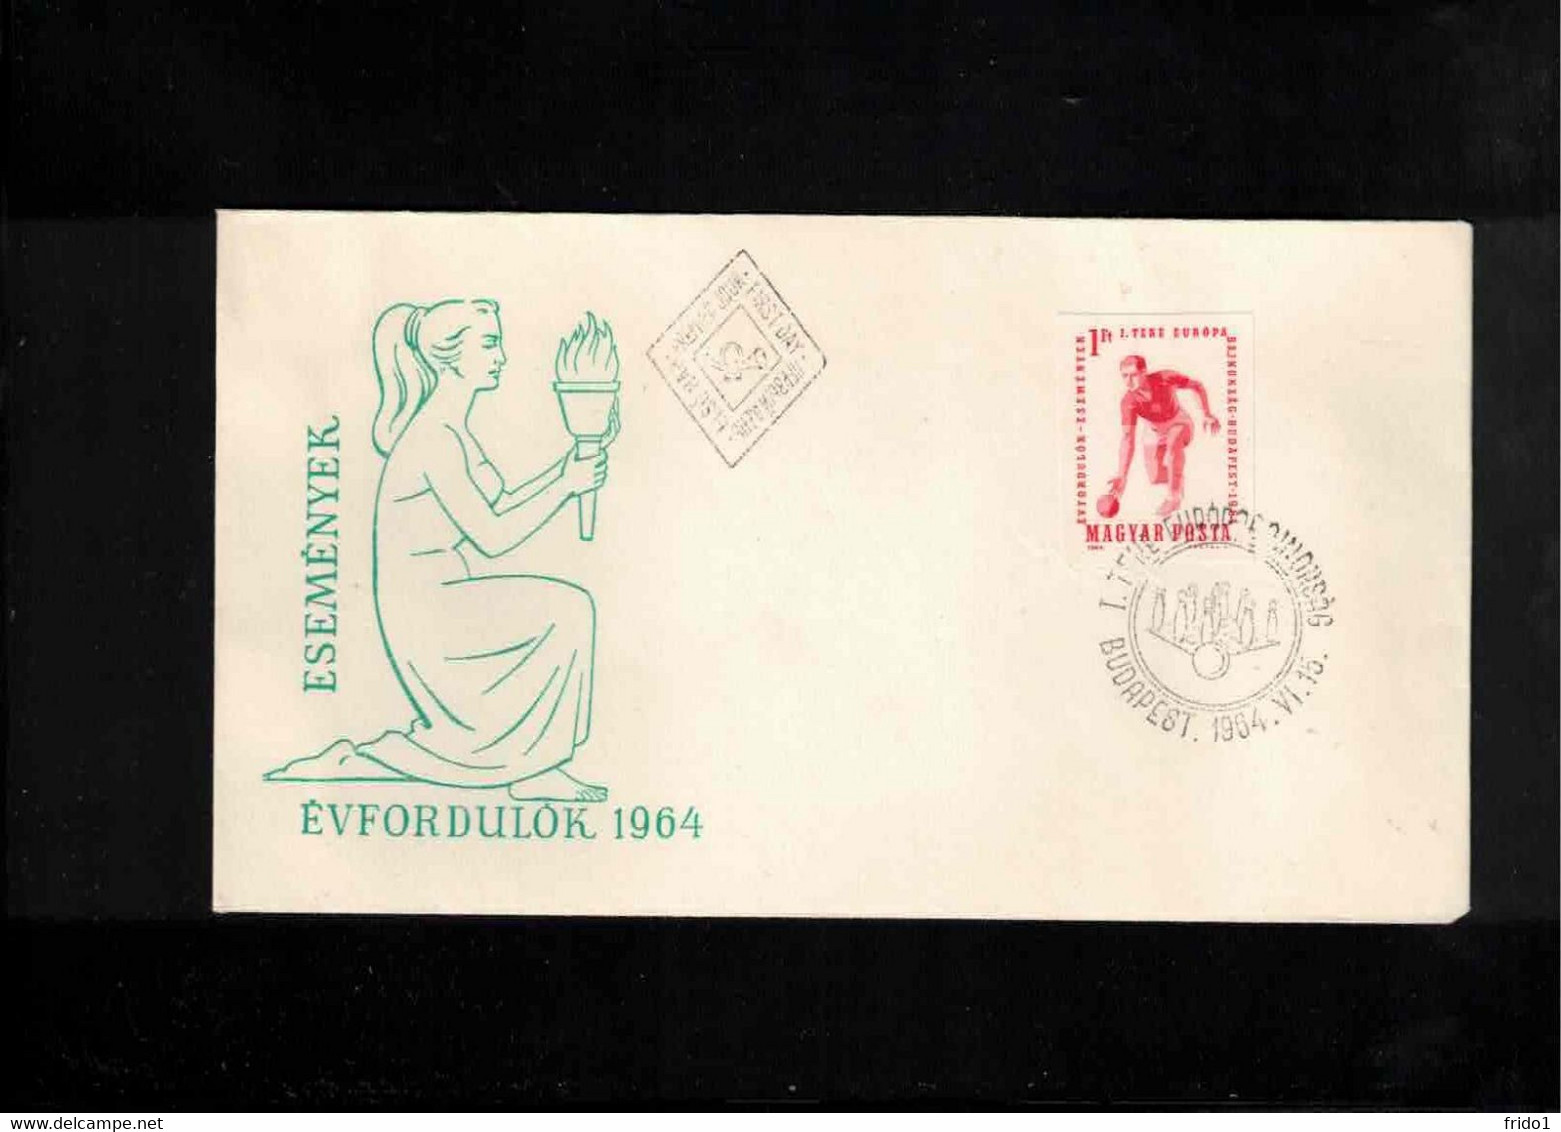 Hungary 1964 European Bowls Championship Budapest Imperforated Stamp FDC - Bowls